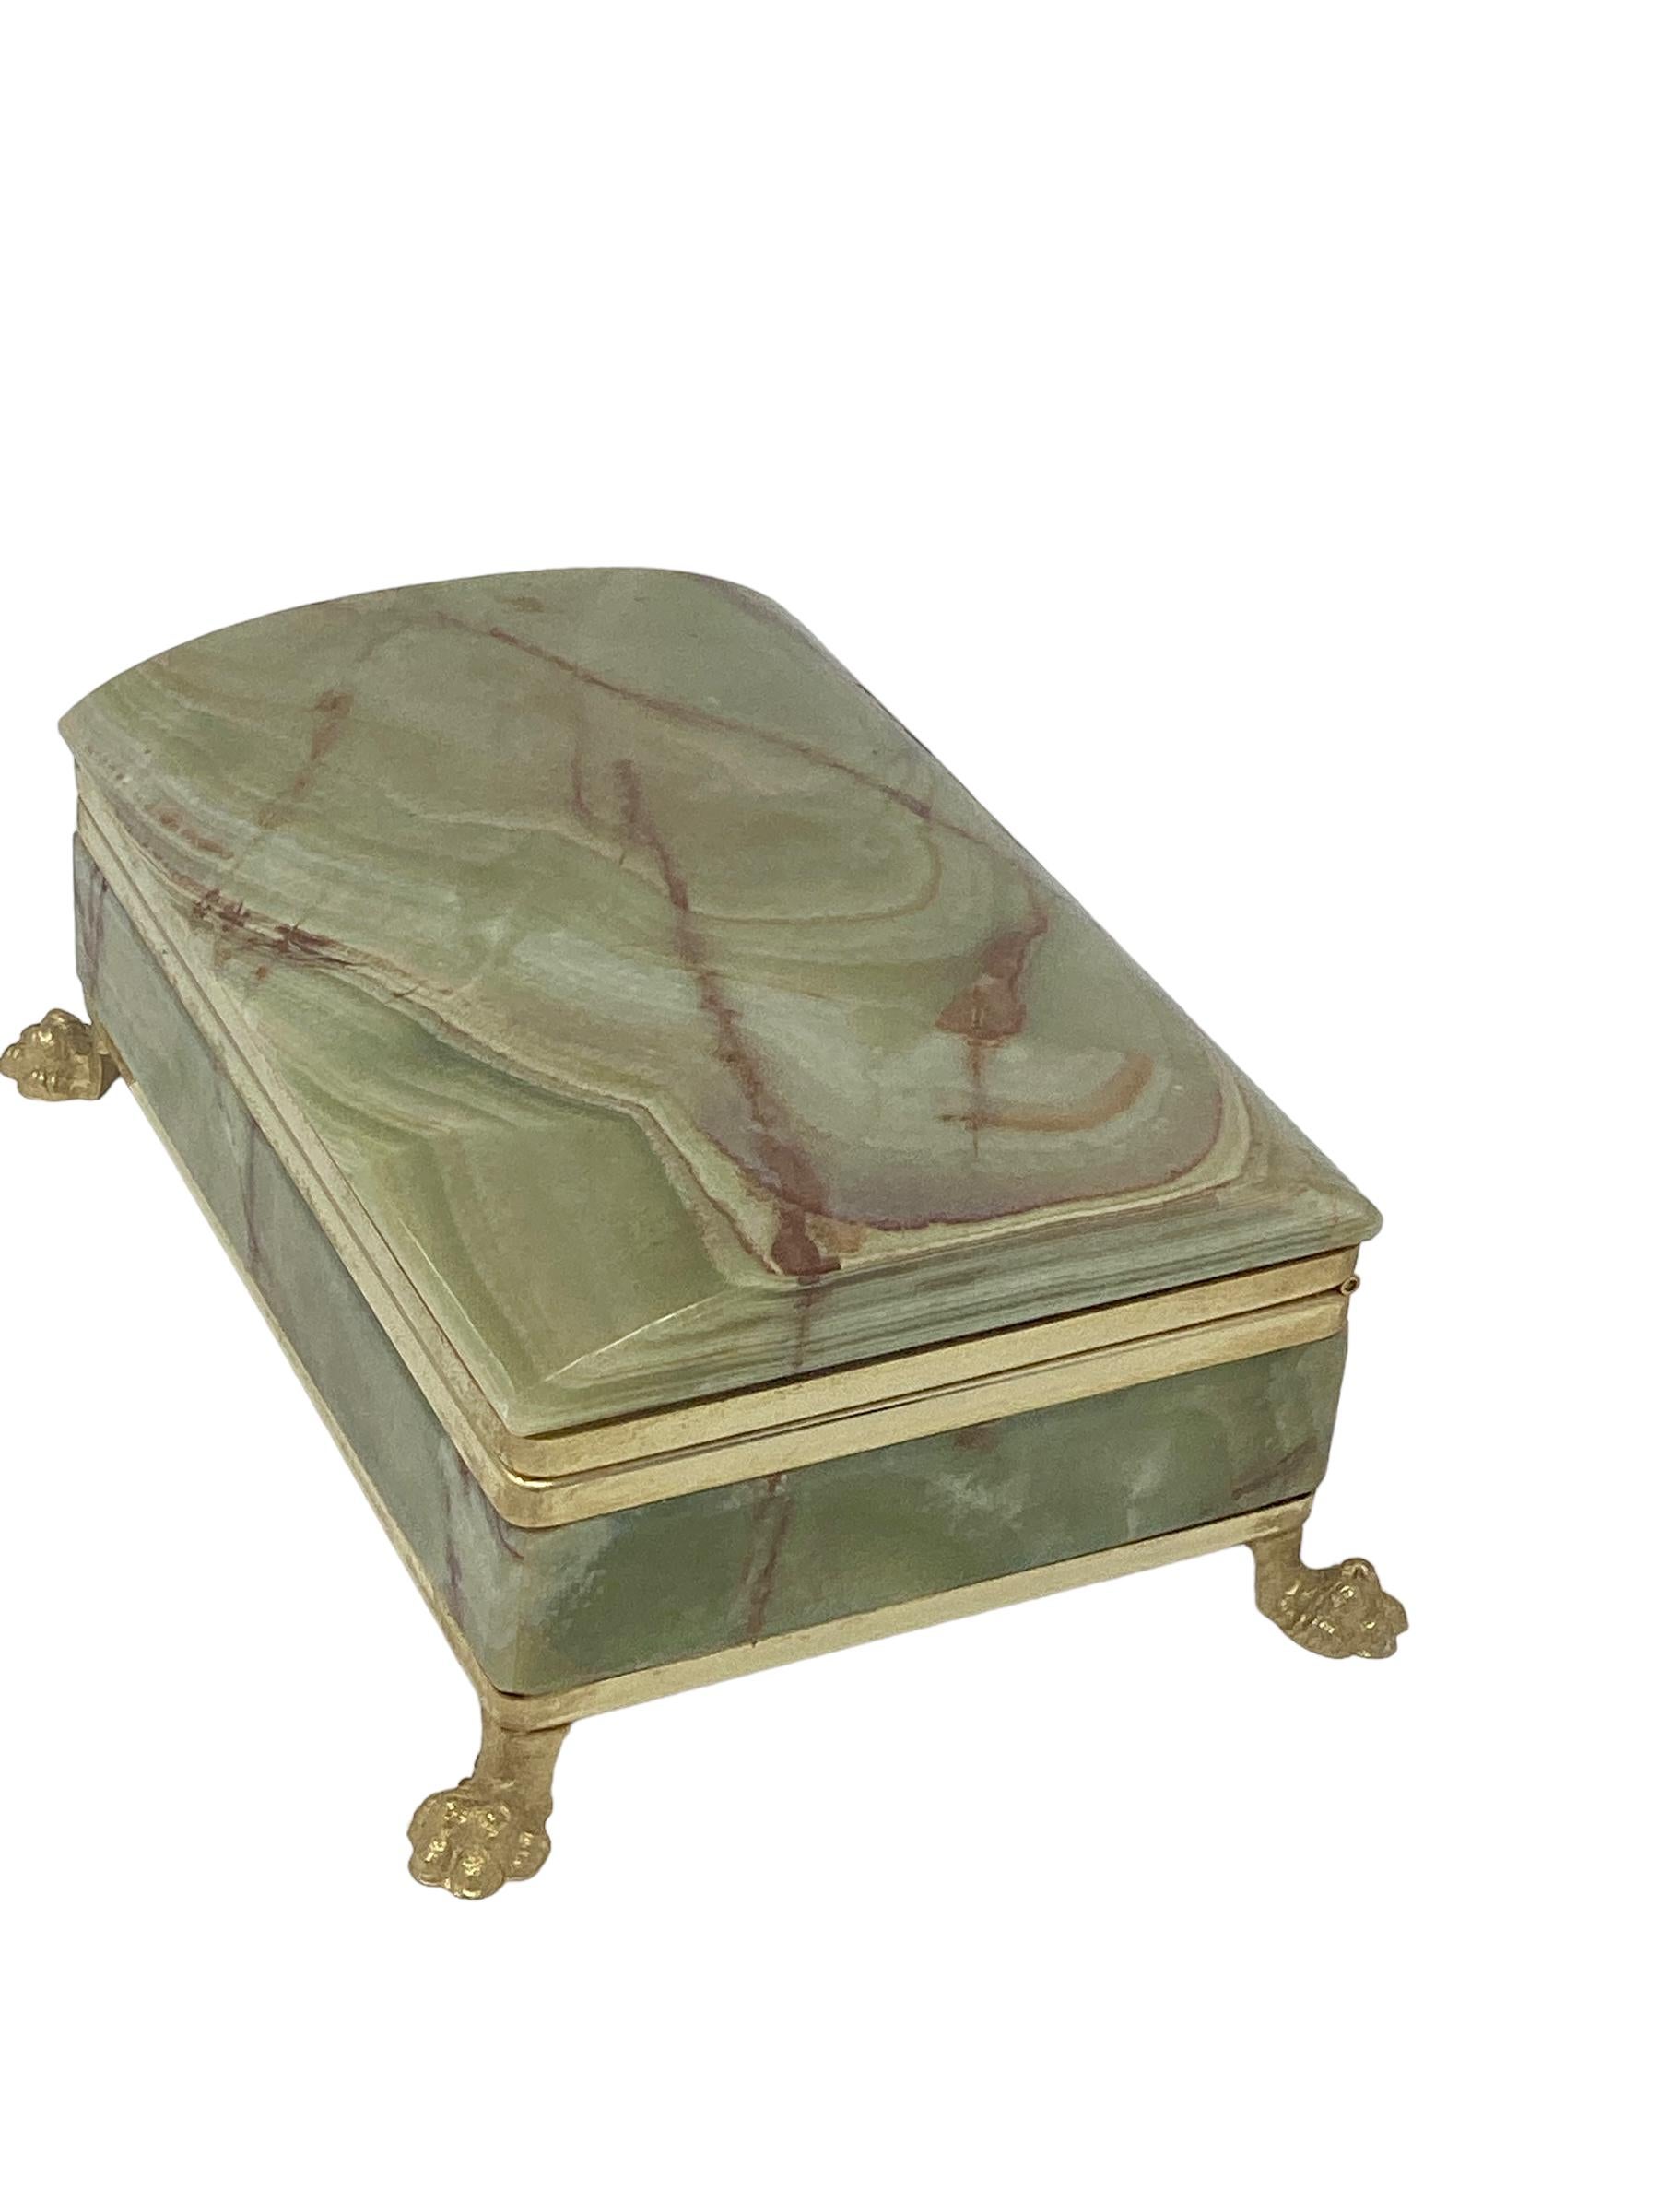 Bronze Mounted Dome Top Green Onyx Box with Paw Feet  For Sale 2